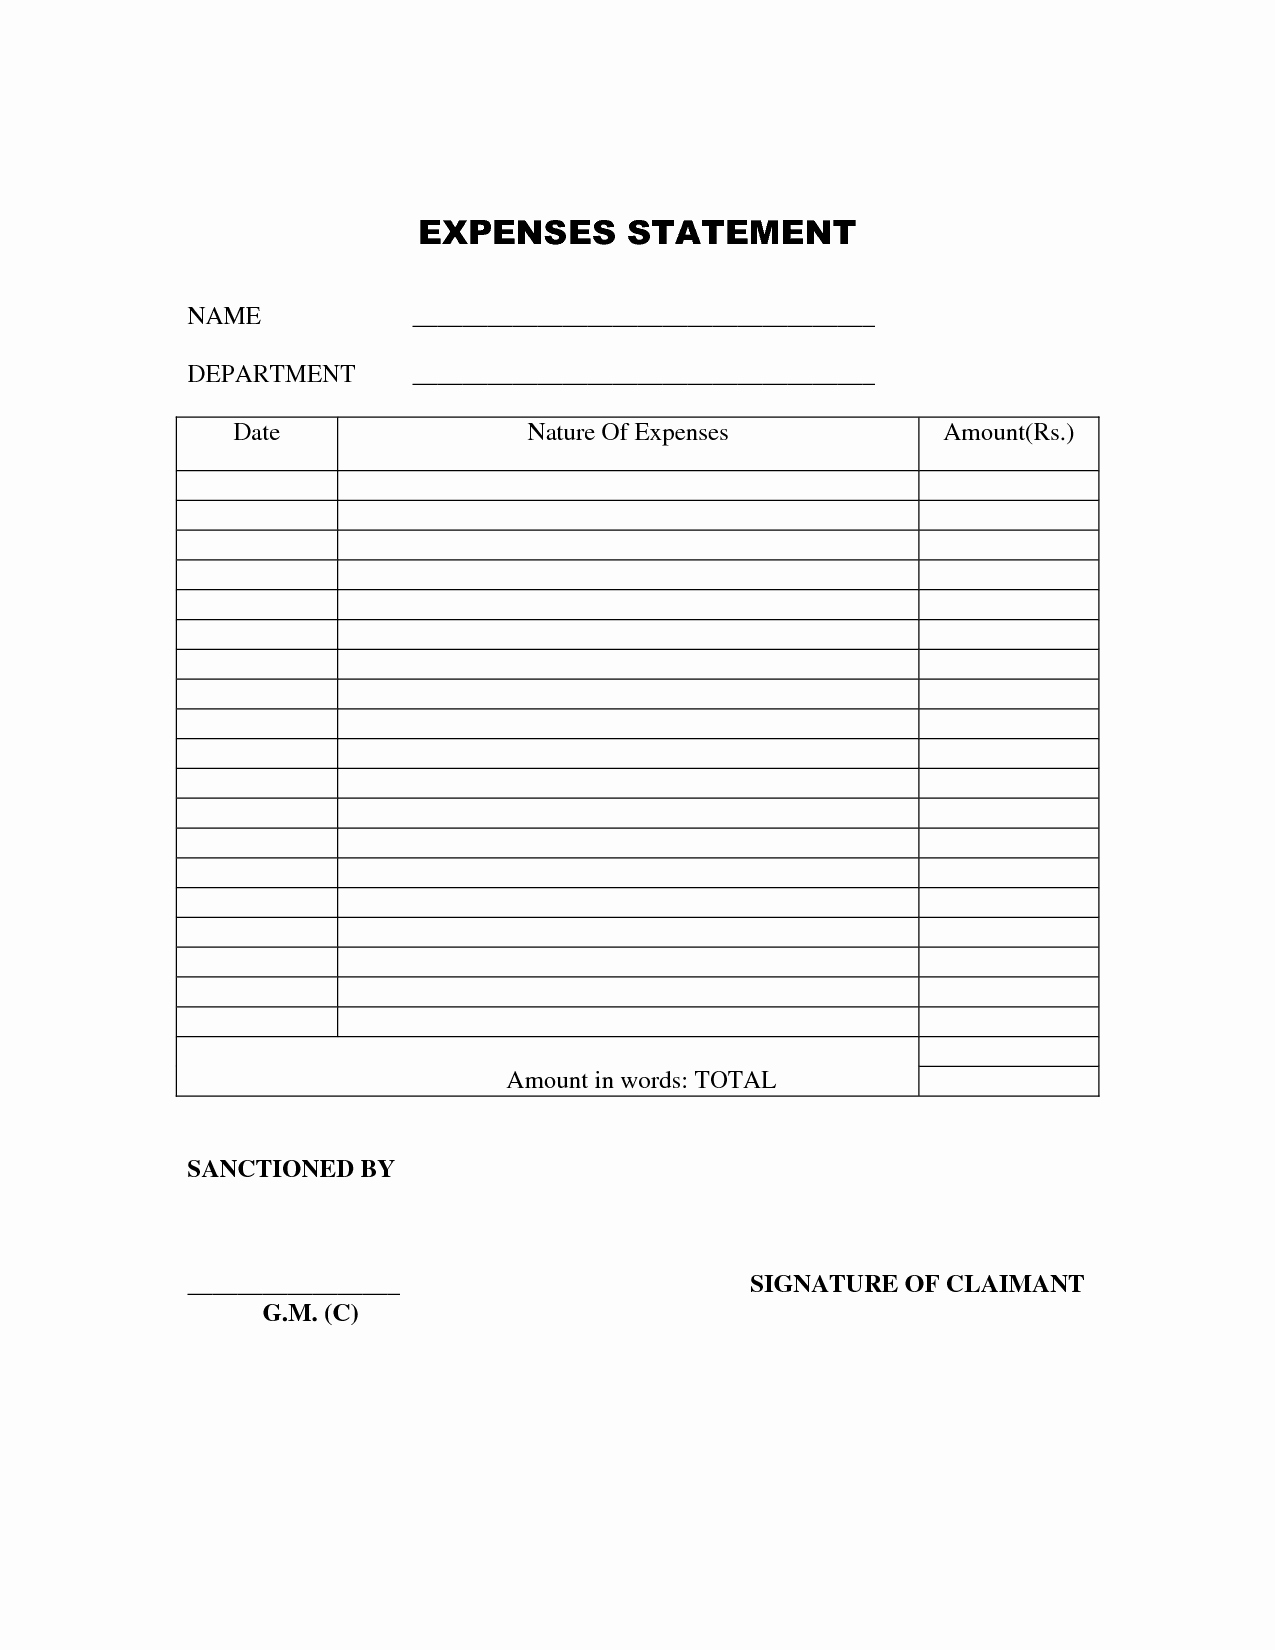 Simple Expense Report Template Lovely Basic Expense Report Template Portablegasgrillweber